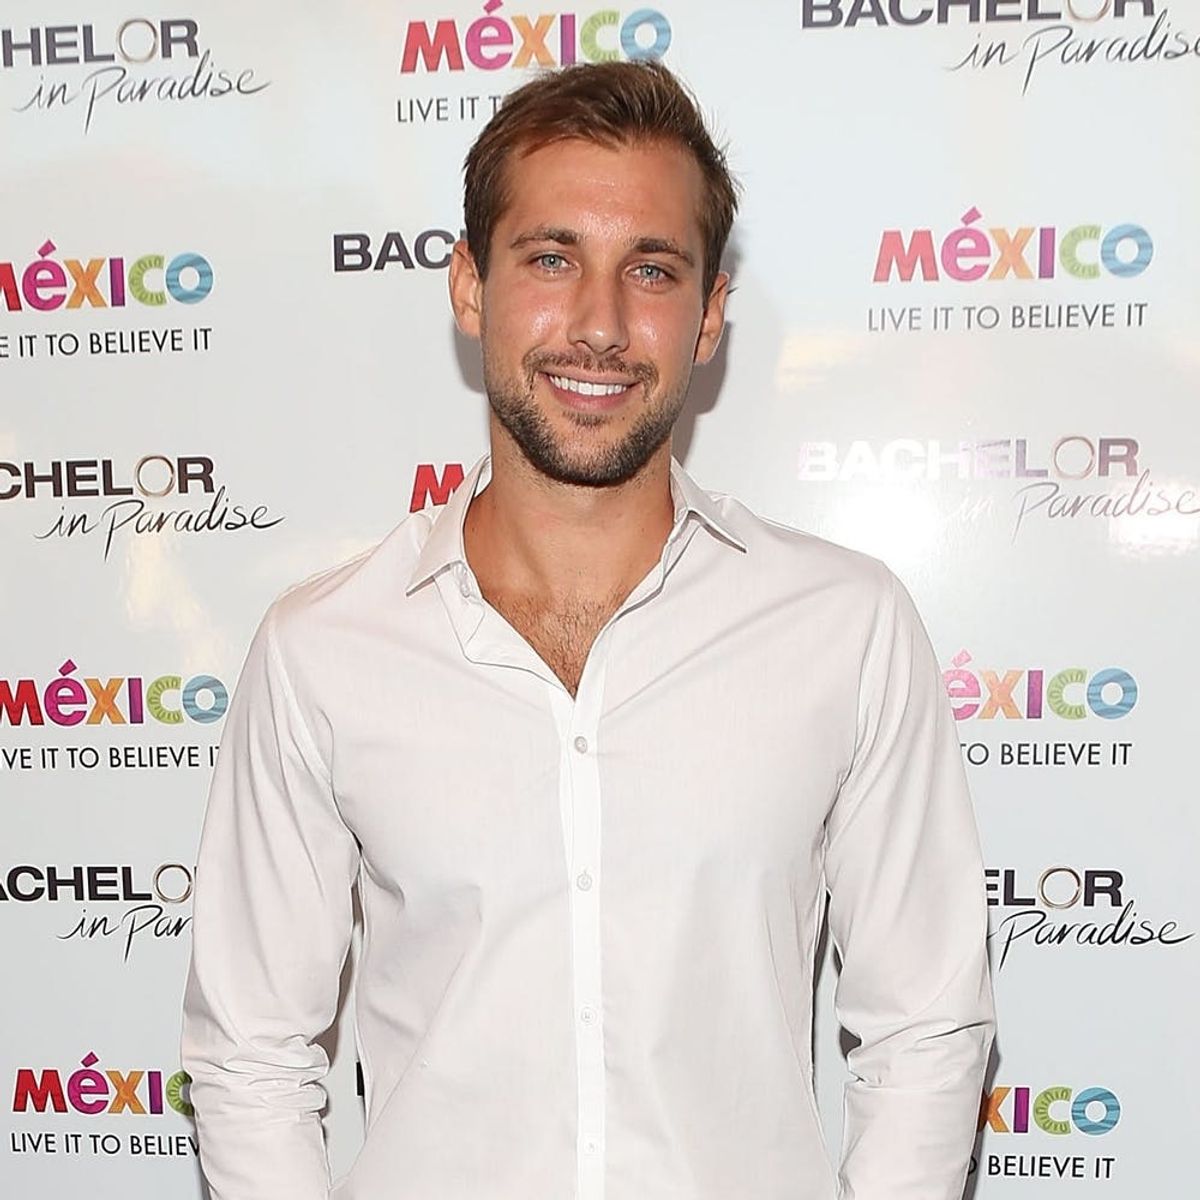 Bachelor in Paradise’s Marcus Grodd Is Engaged!